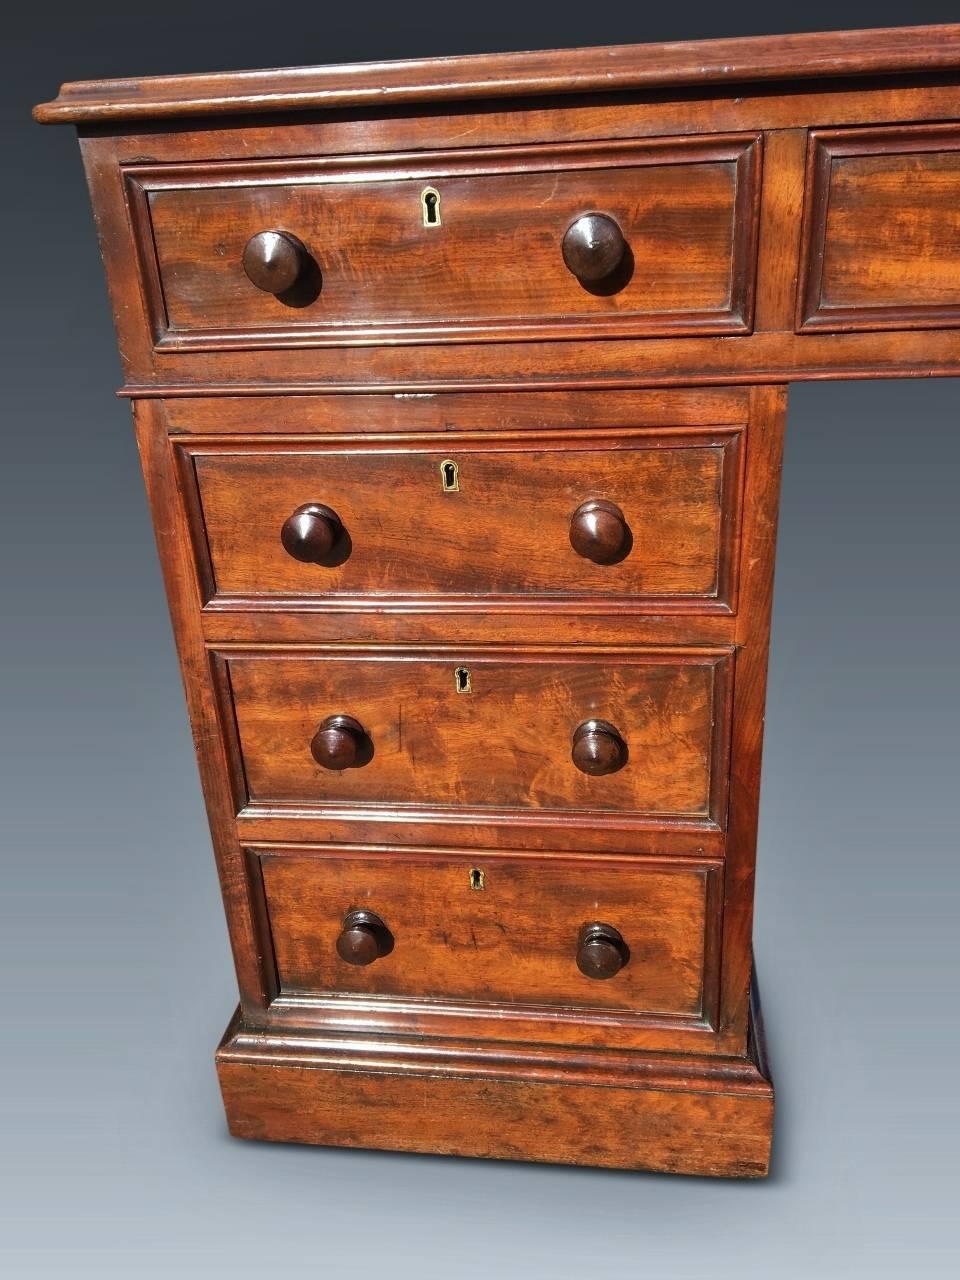 Fine quality English Mahogany pedestal desk dated, circa 1860.
This delightful three sectional desk is beautifully proportioned and made using nicely figured veneers, pretty button knob handles and a retaining gallery to keep everything in place!